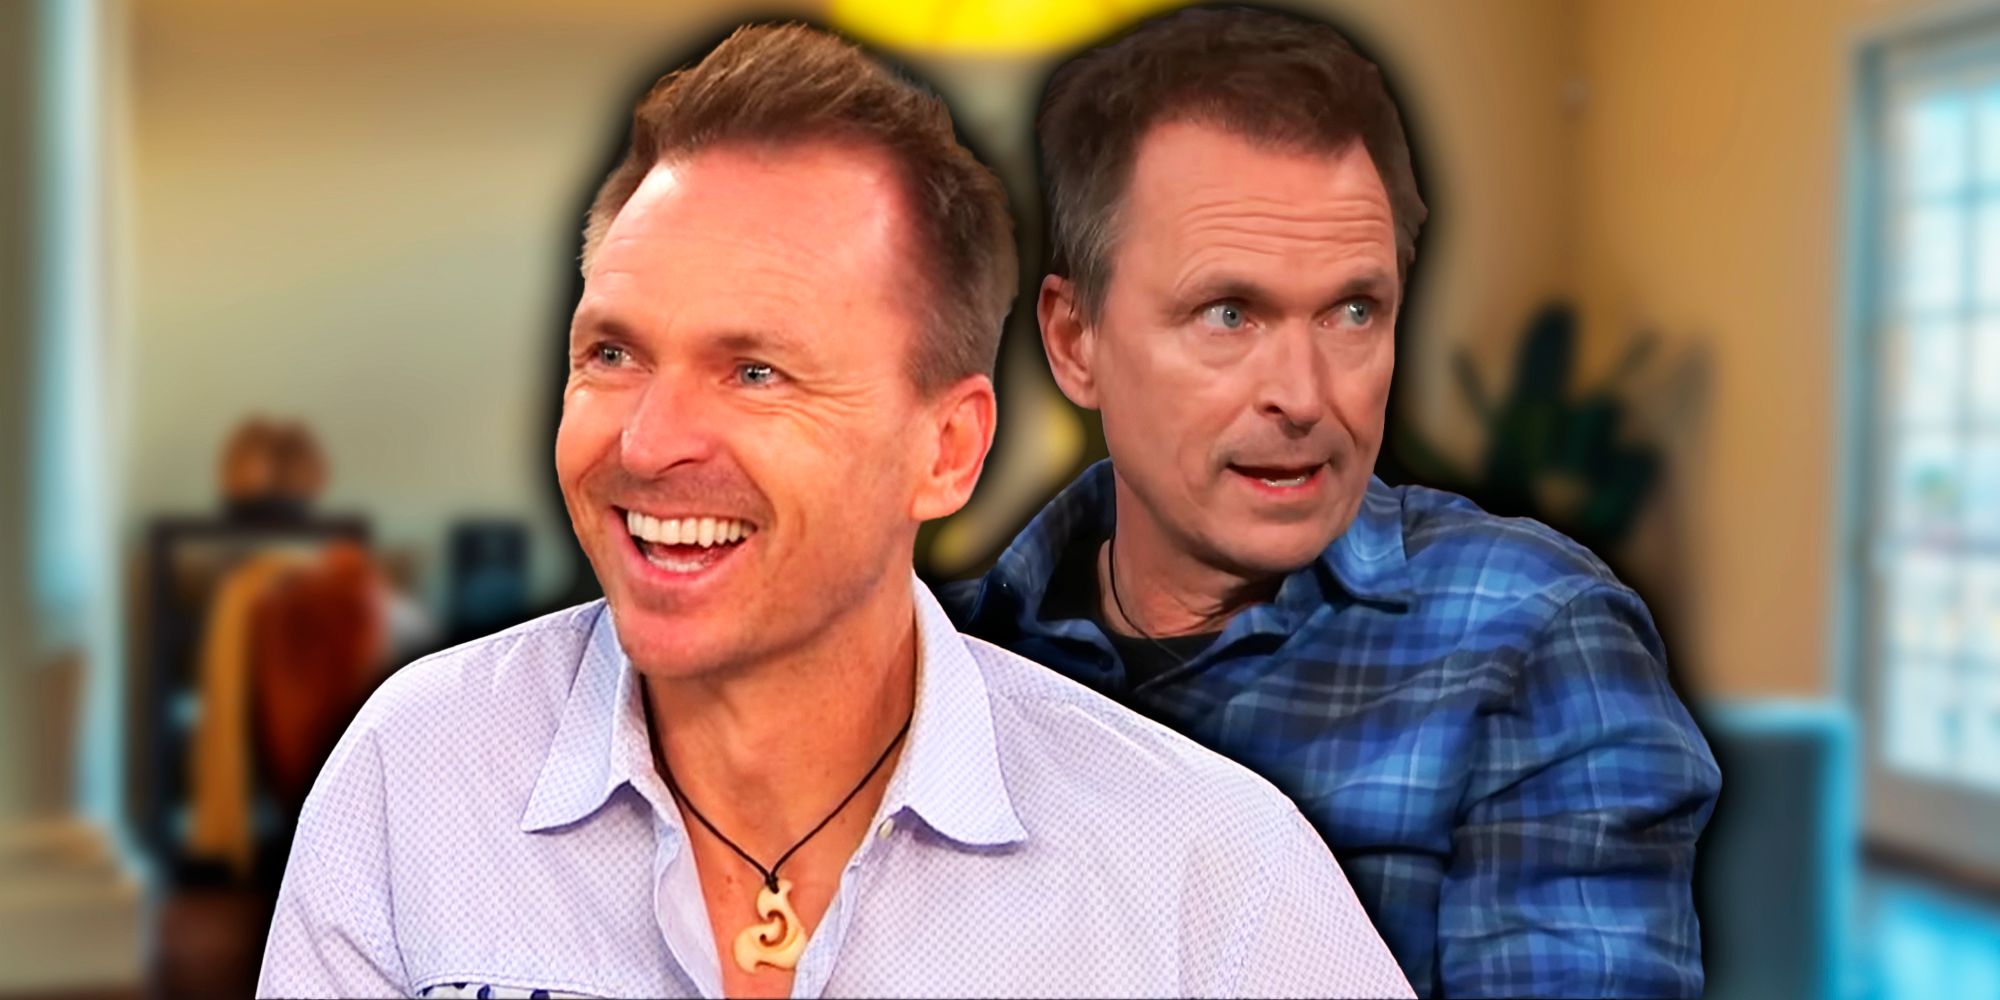 Phil Keoghan host of The Amazing Race